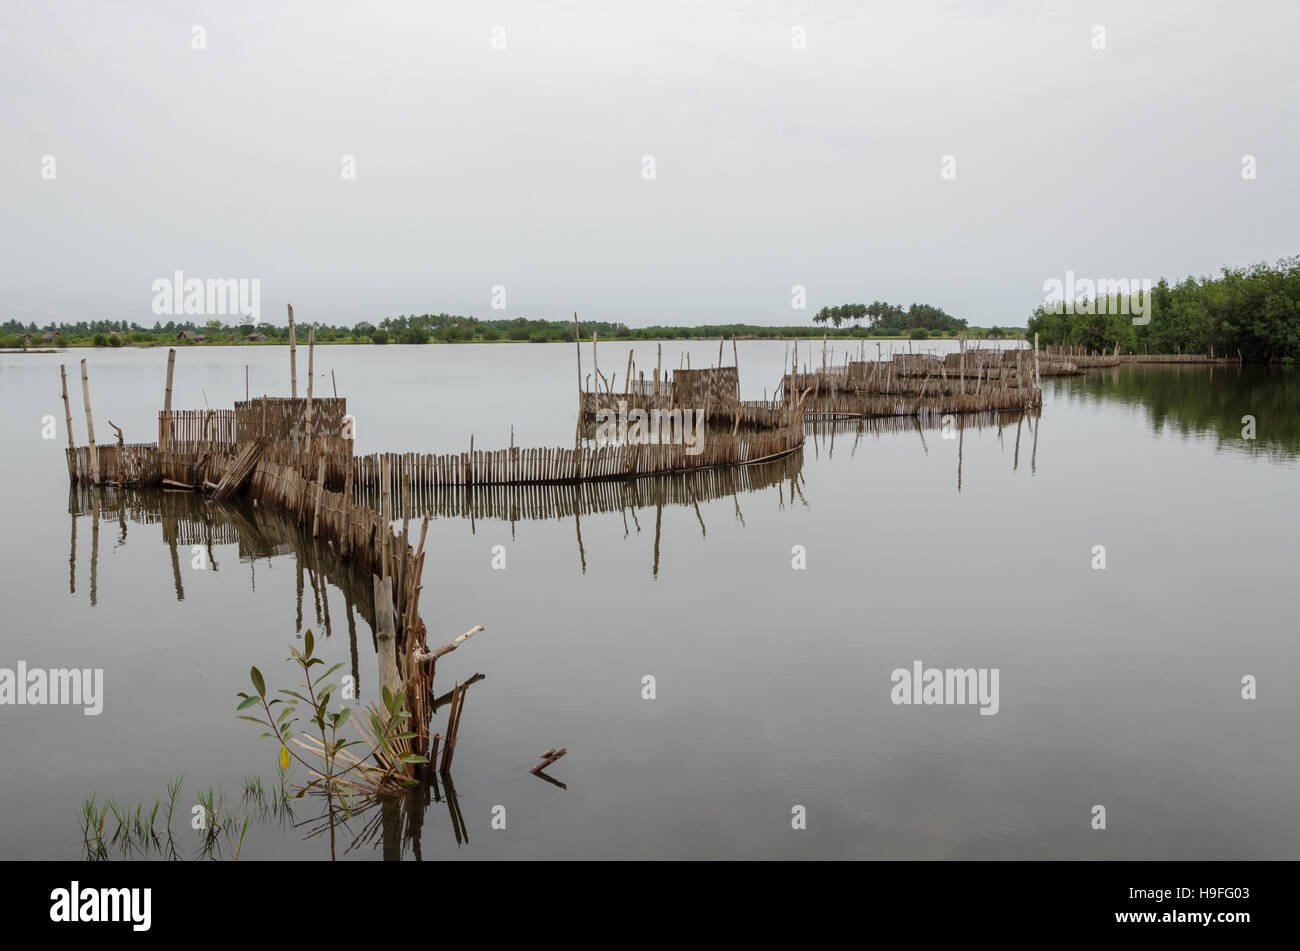 https://c8.alamy.com/comp/H9FG03/traditional-reed-fishing-traps-used-in-wetlands-near-the-coast-in-H9FG03.jpg